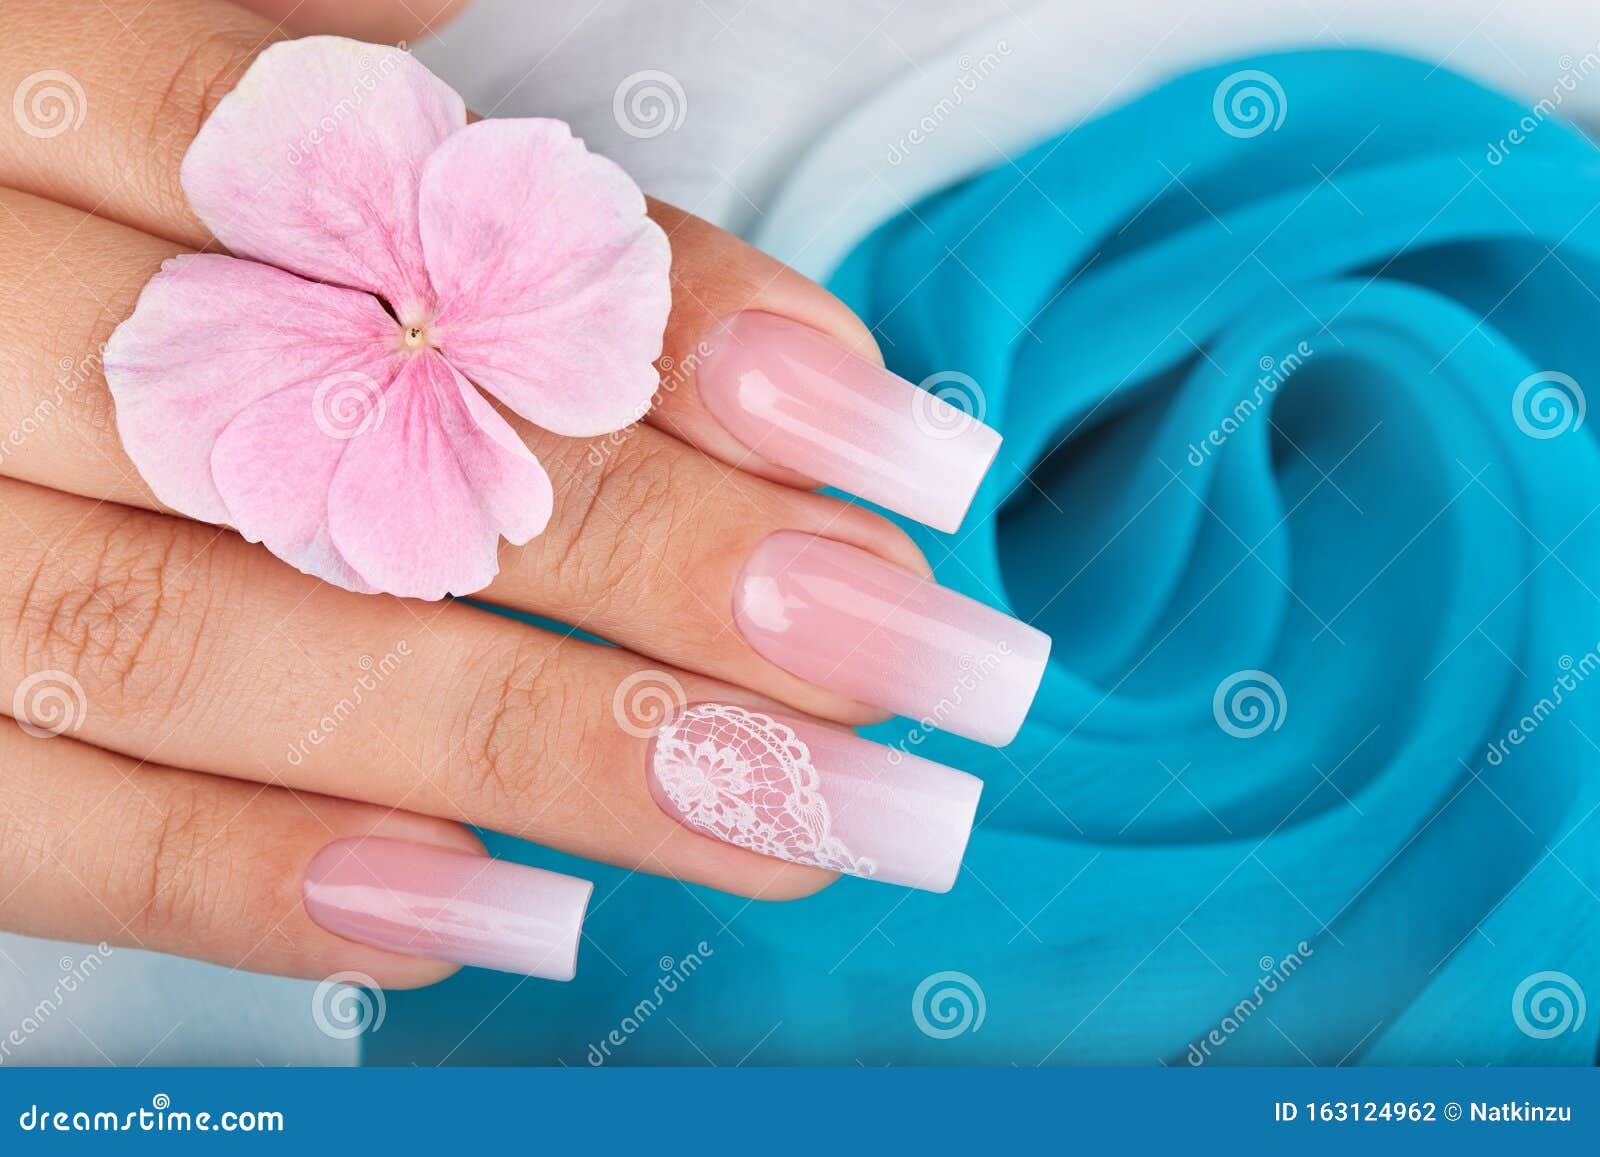 hand with long artificial manicured nails with ombre gradient 